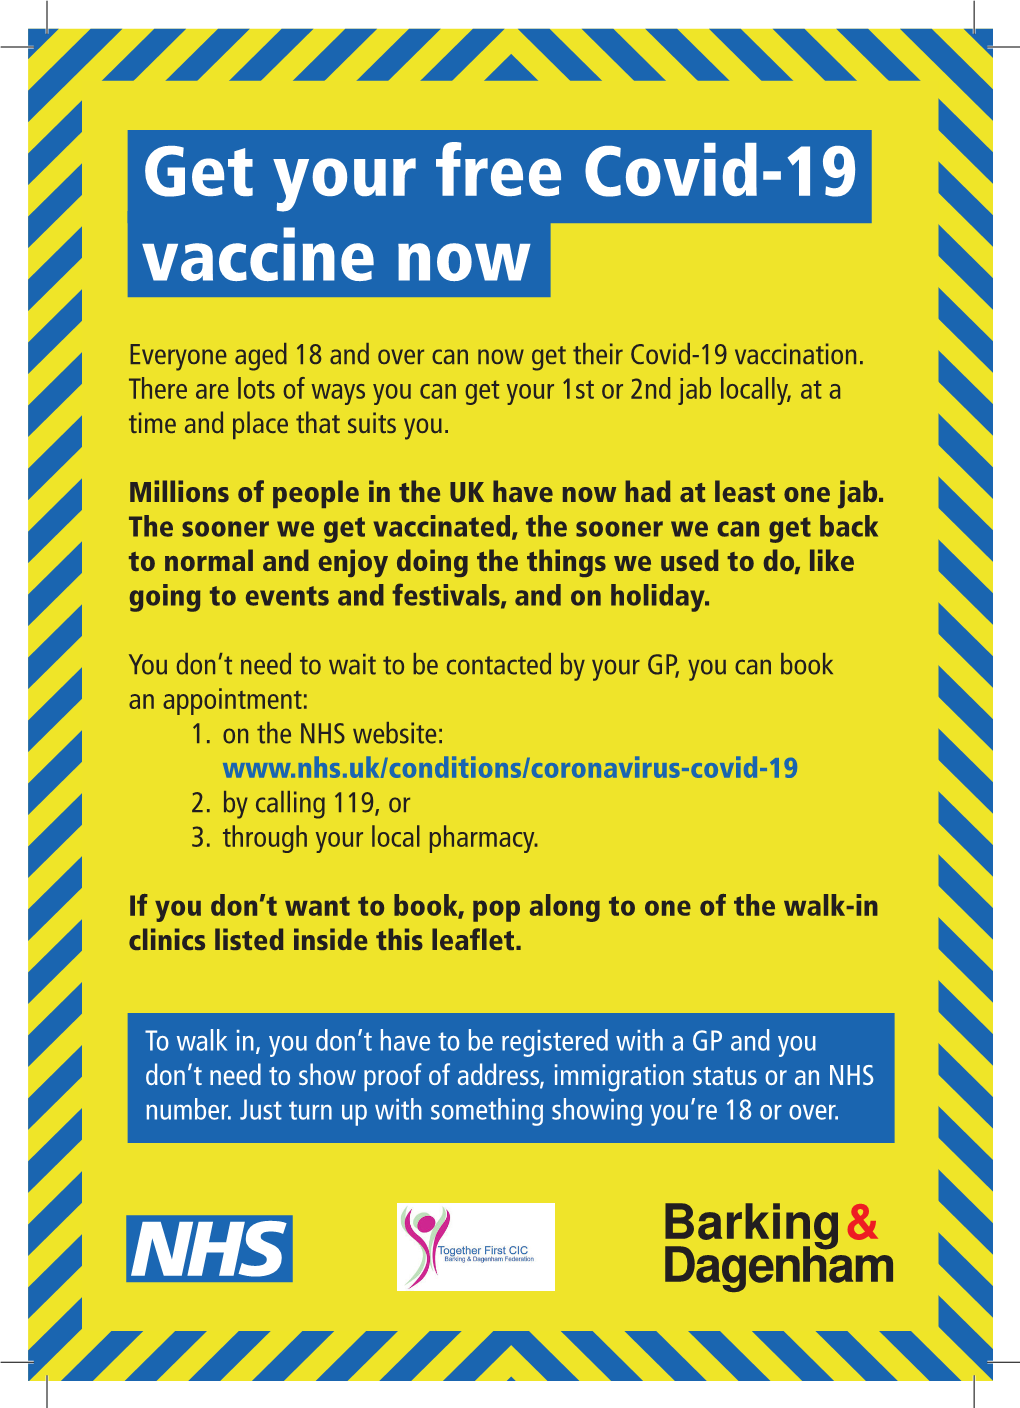 Get Your Free Covid-19 Vaccine Now